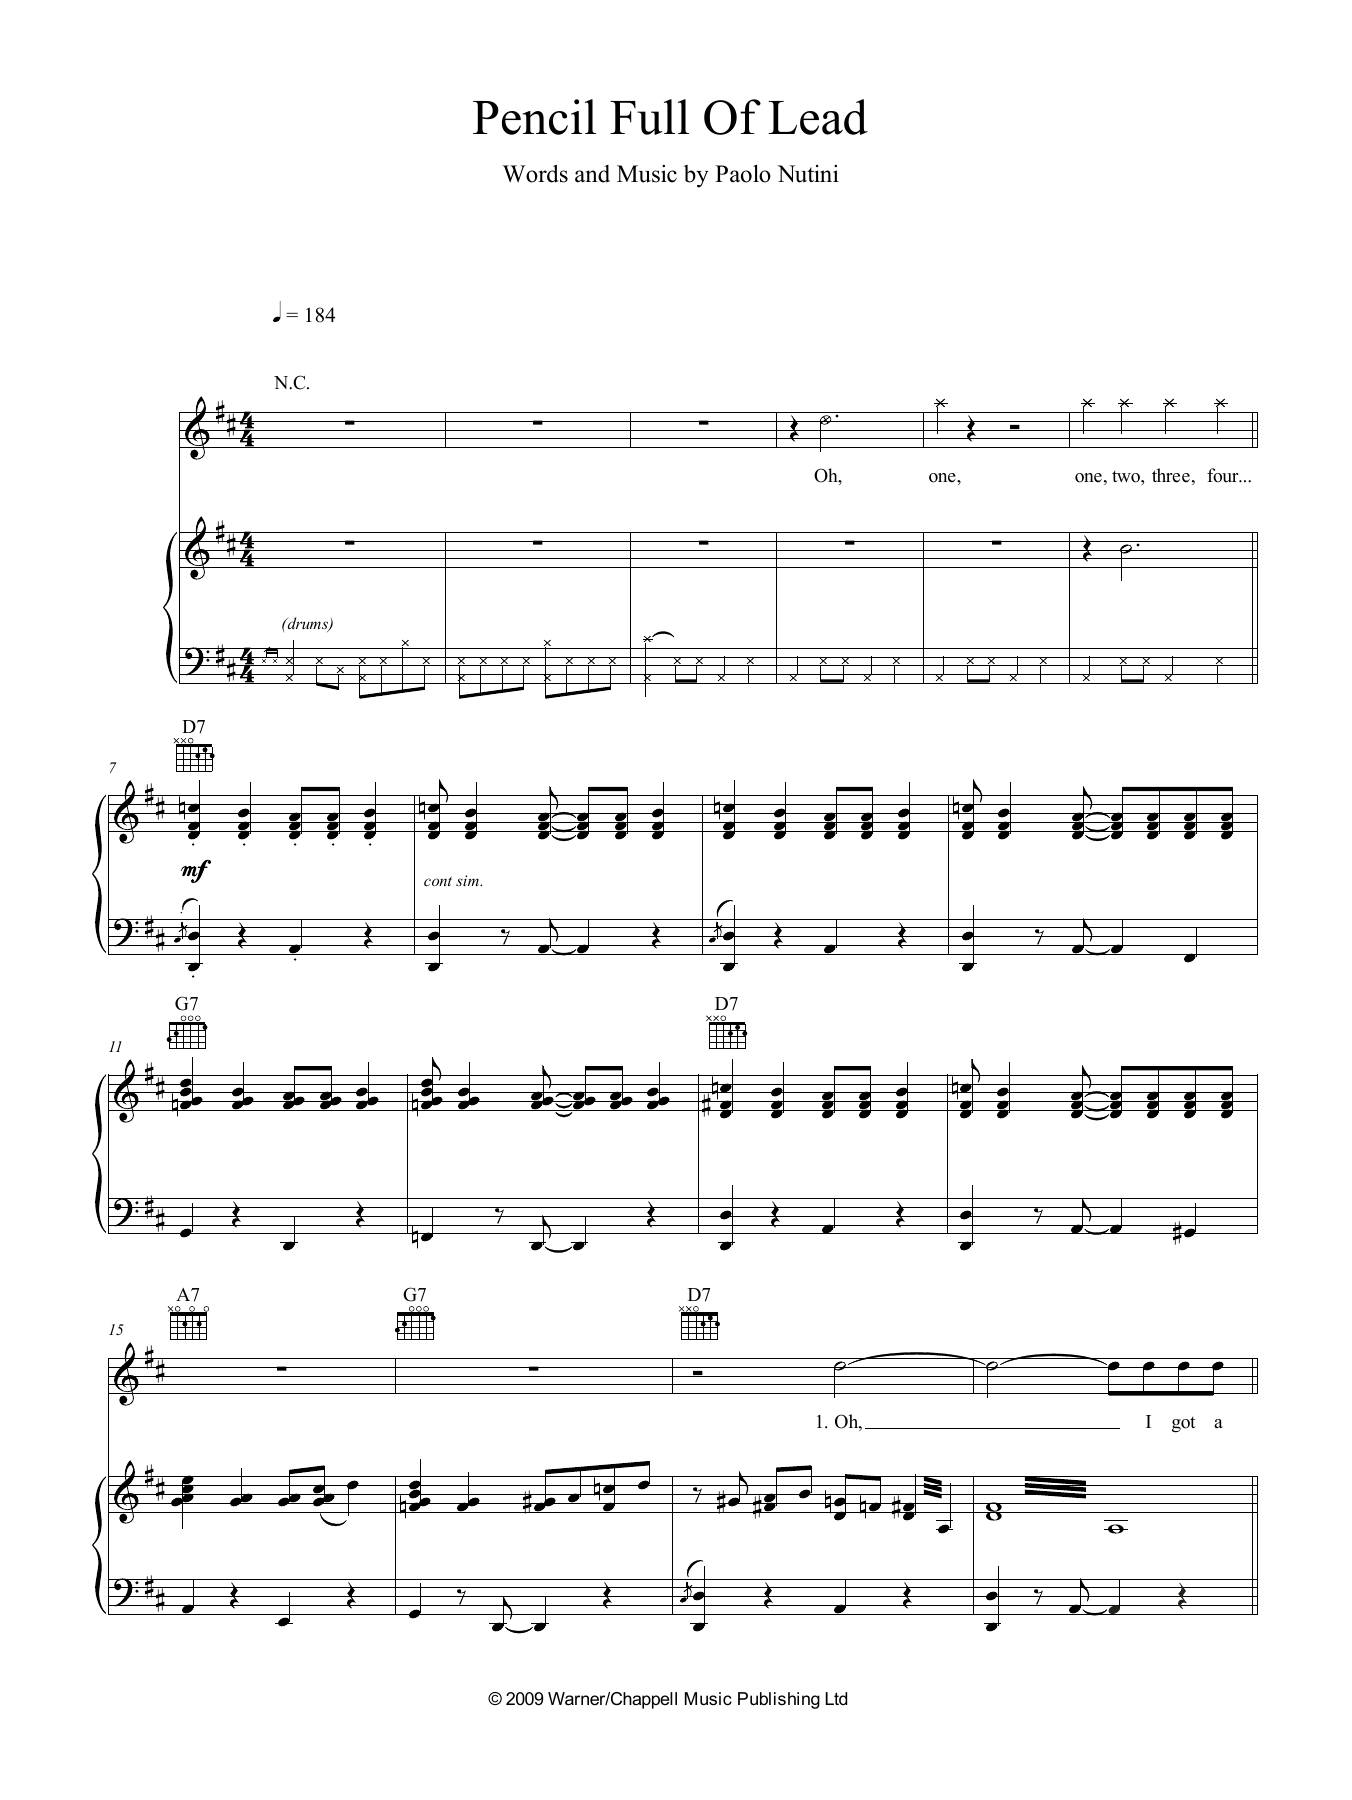 Download Paolo Nutini Pencil Full Of Lead Sheet Music